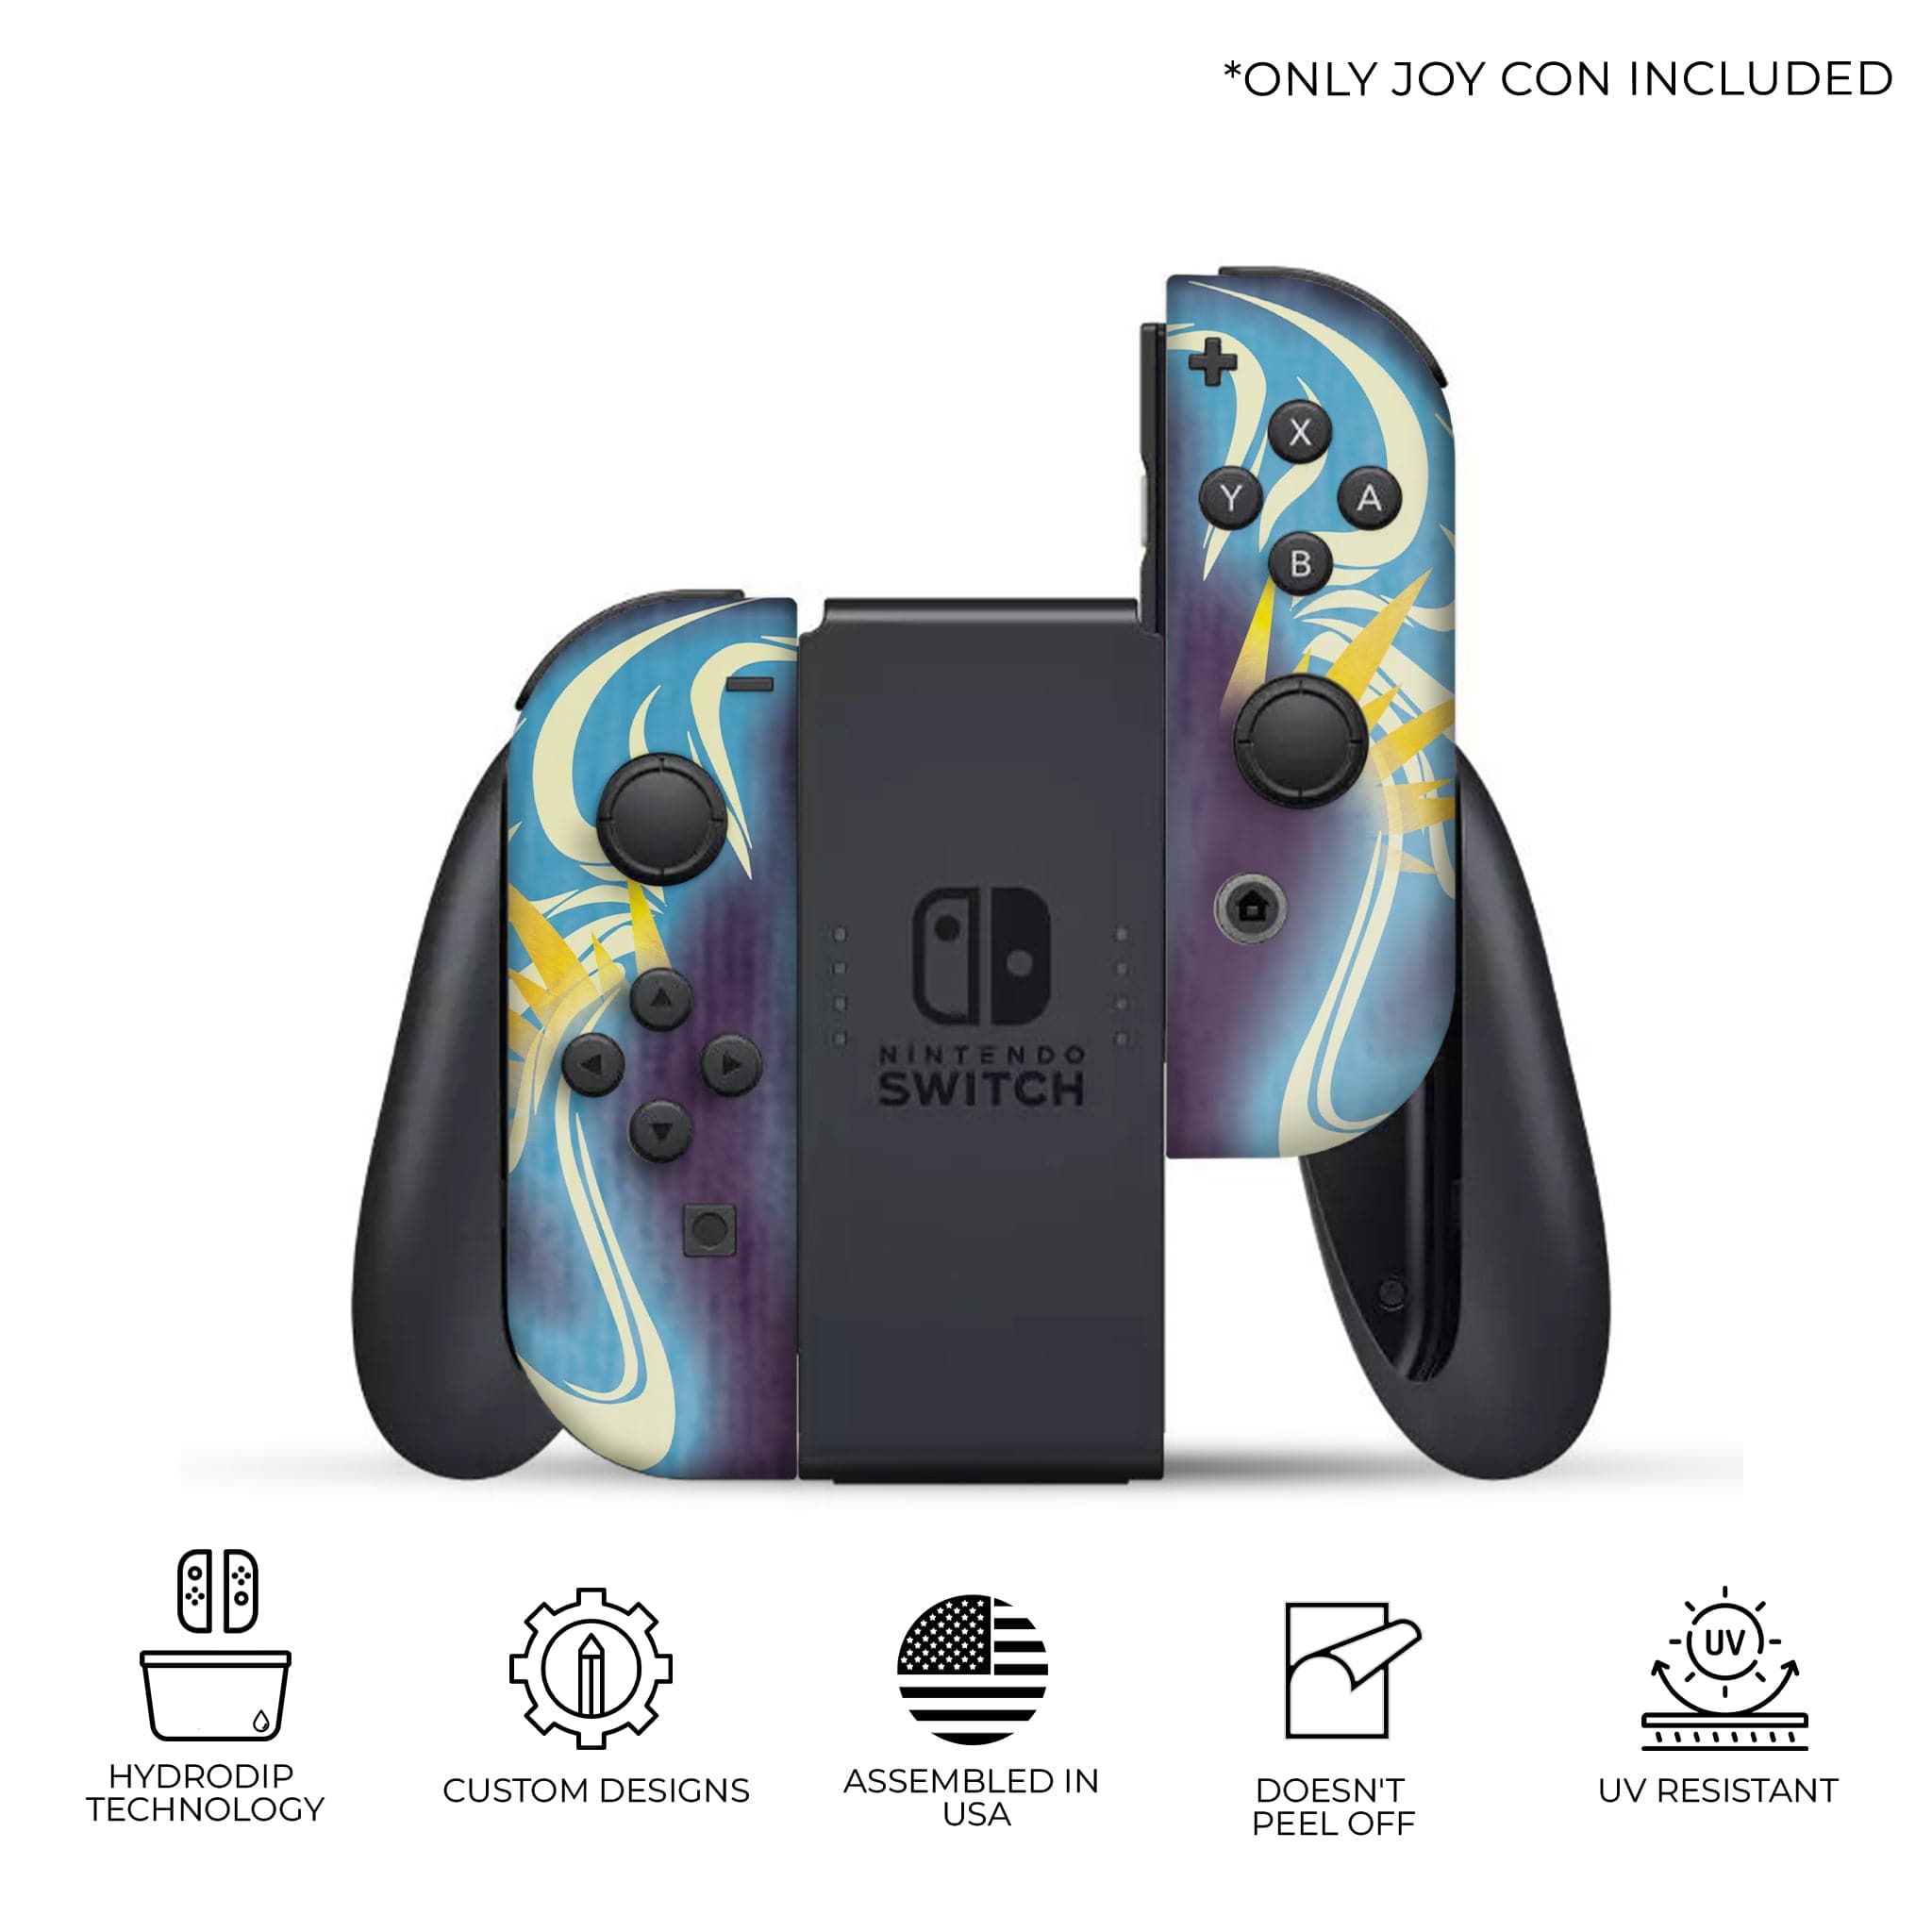 Diablo Tyrael Inspired Nintendo Switch Joy-Con Left and Right Switch Controllers by Nintendo